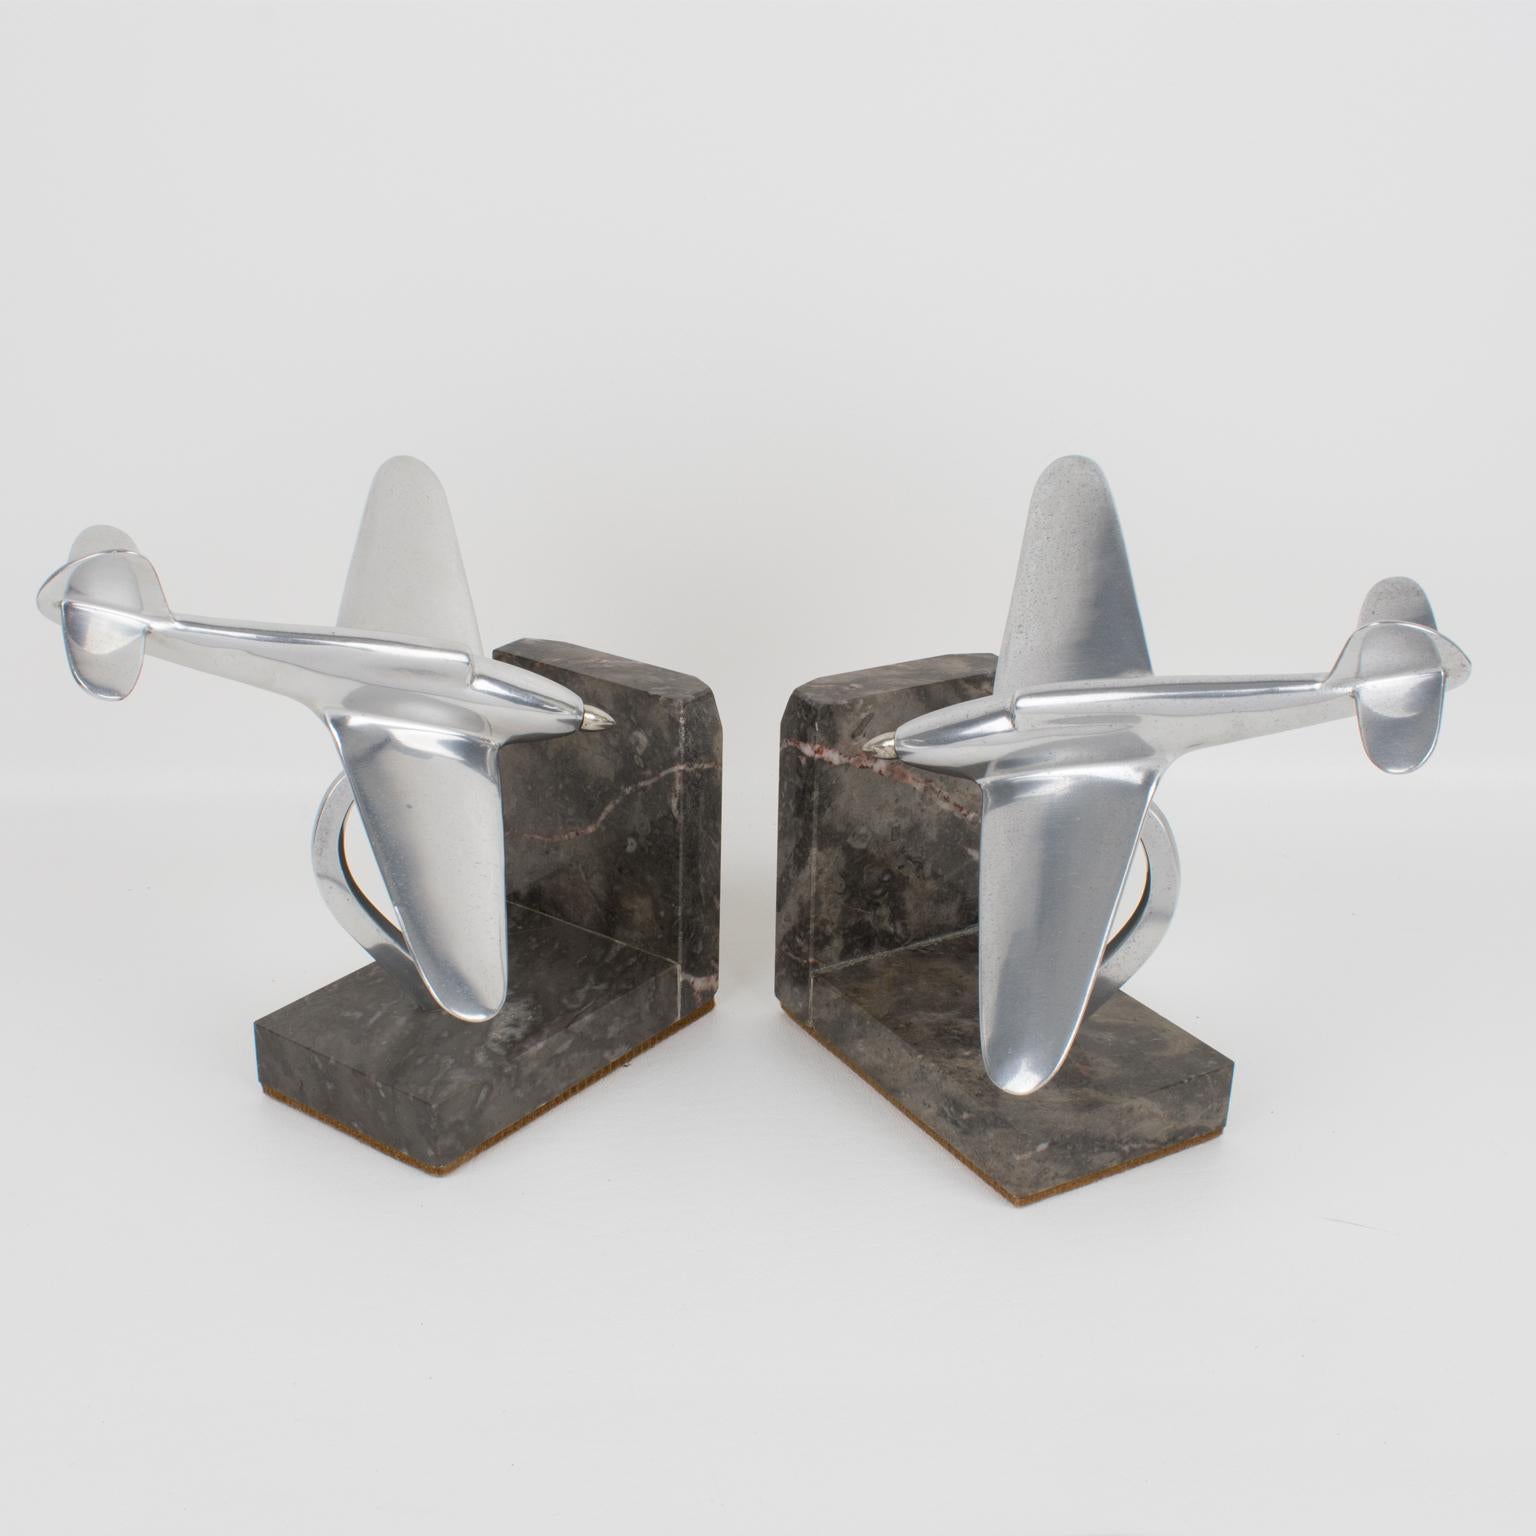 French Art Deco Aviation Aluminum and Marble Airplane Bookends 1